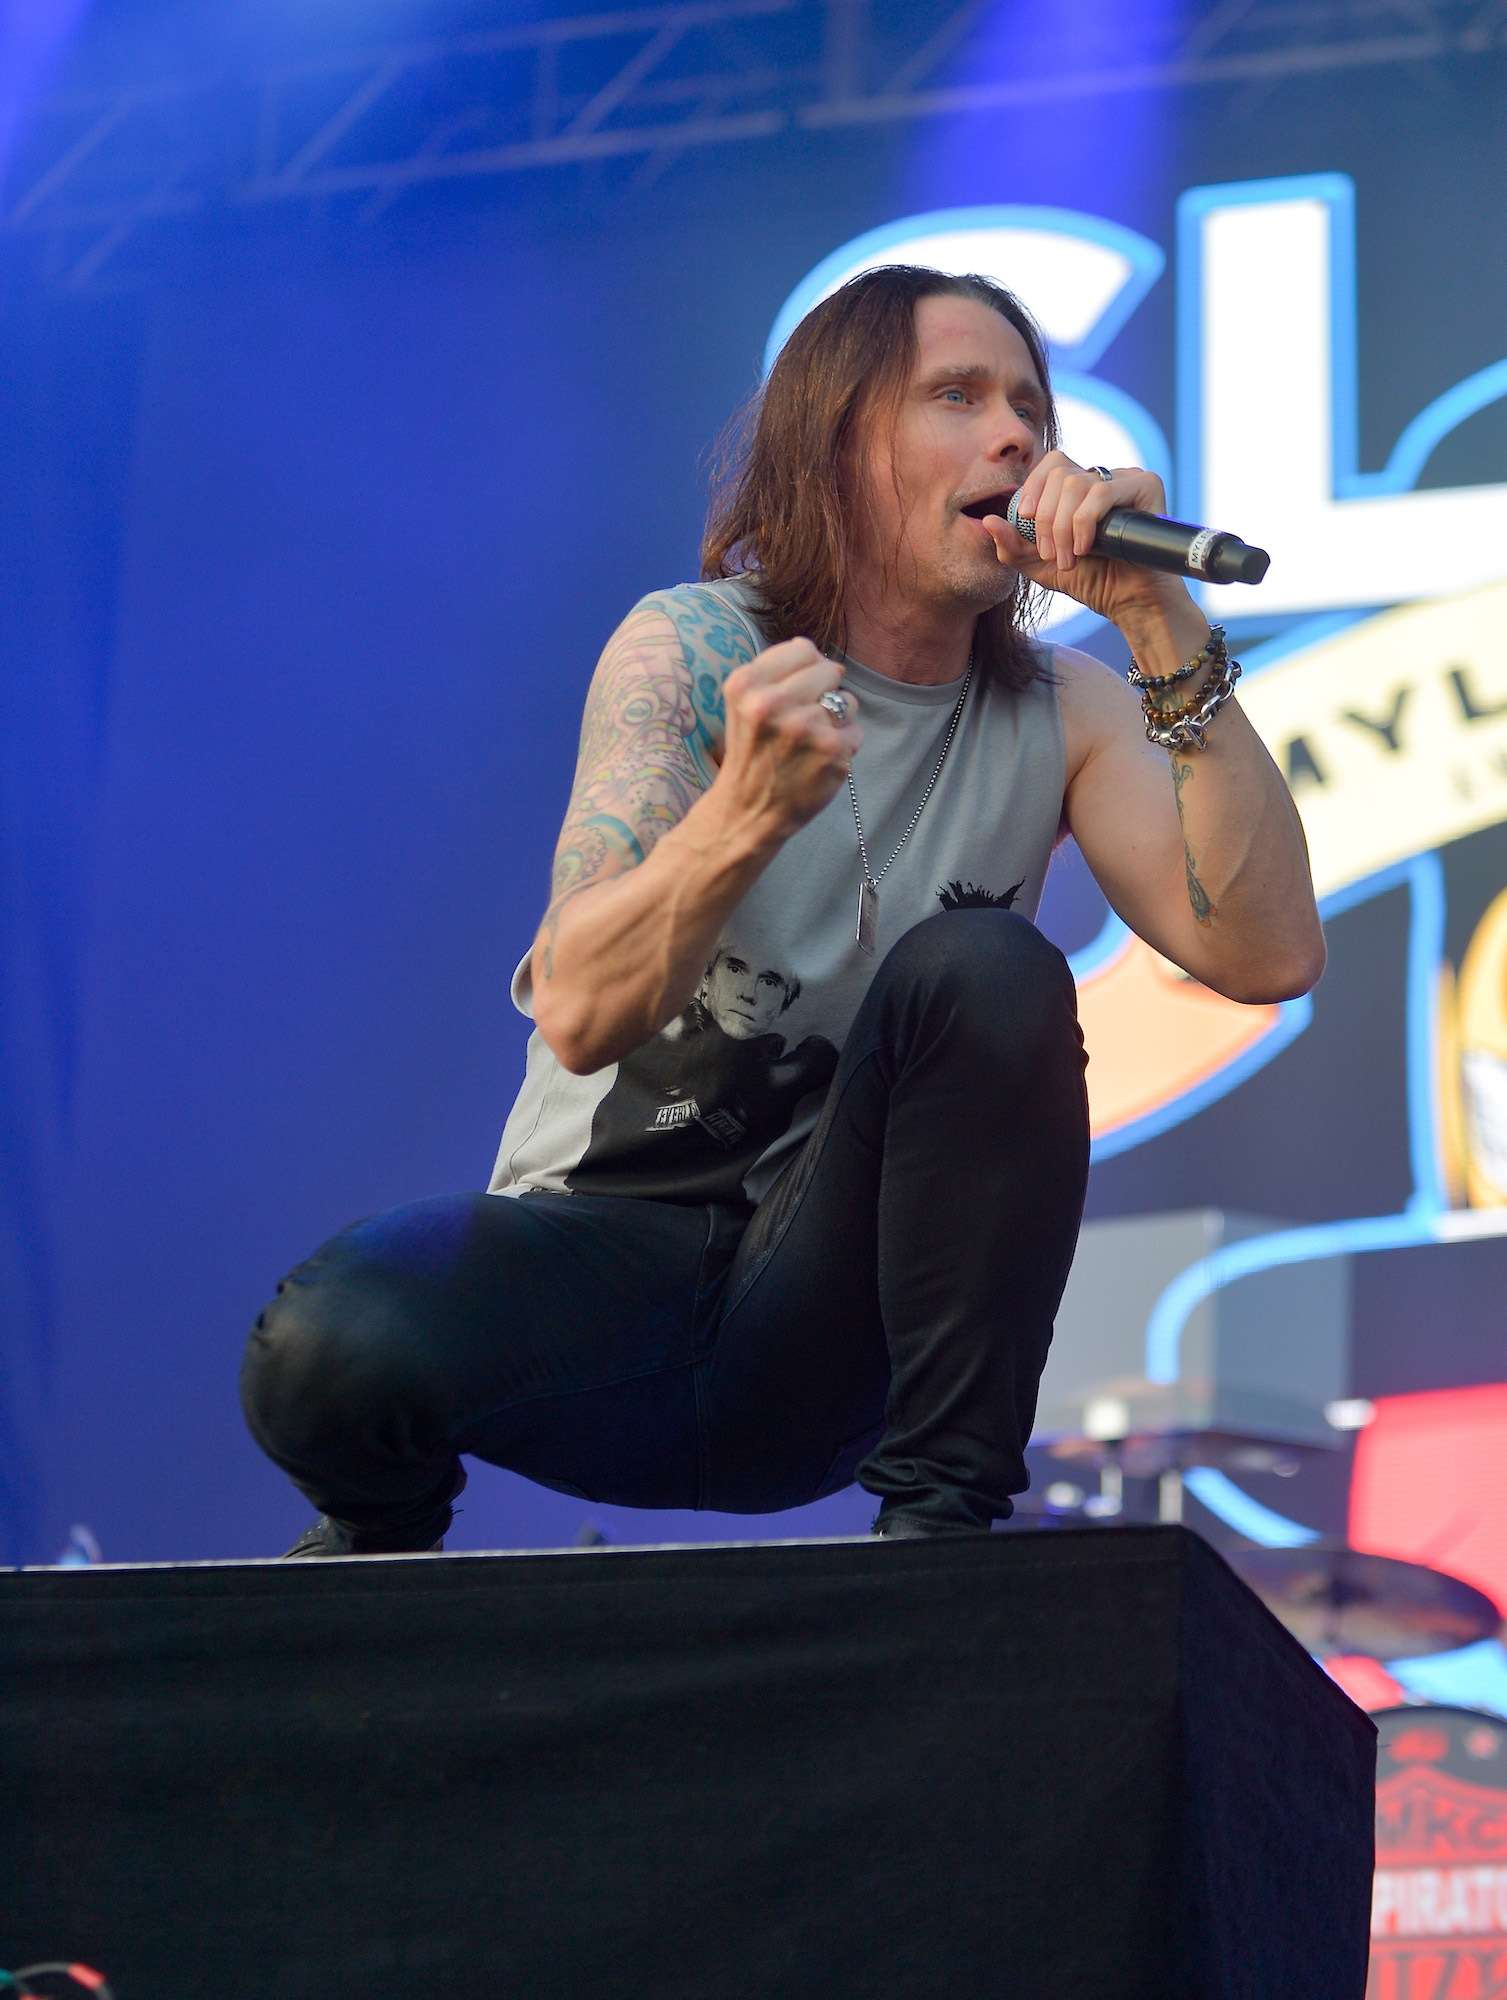 SLASH Featuring Myles Kennedy And The Conspirators Live at Lollapalooza [GALLERY] 17